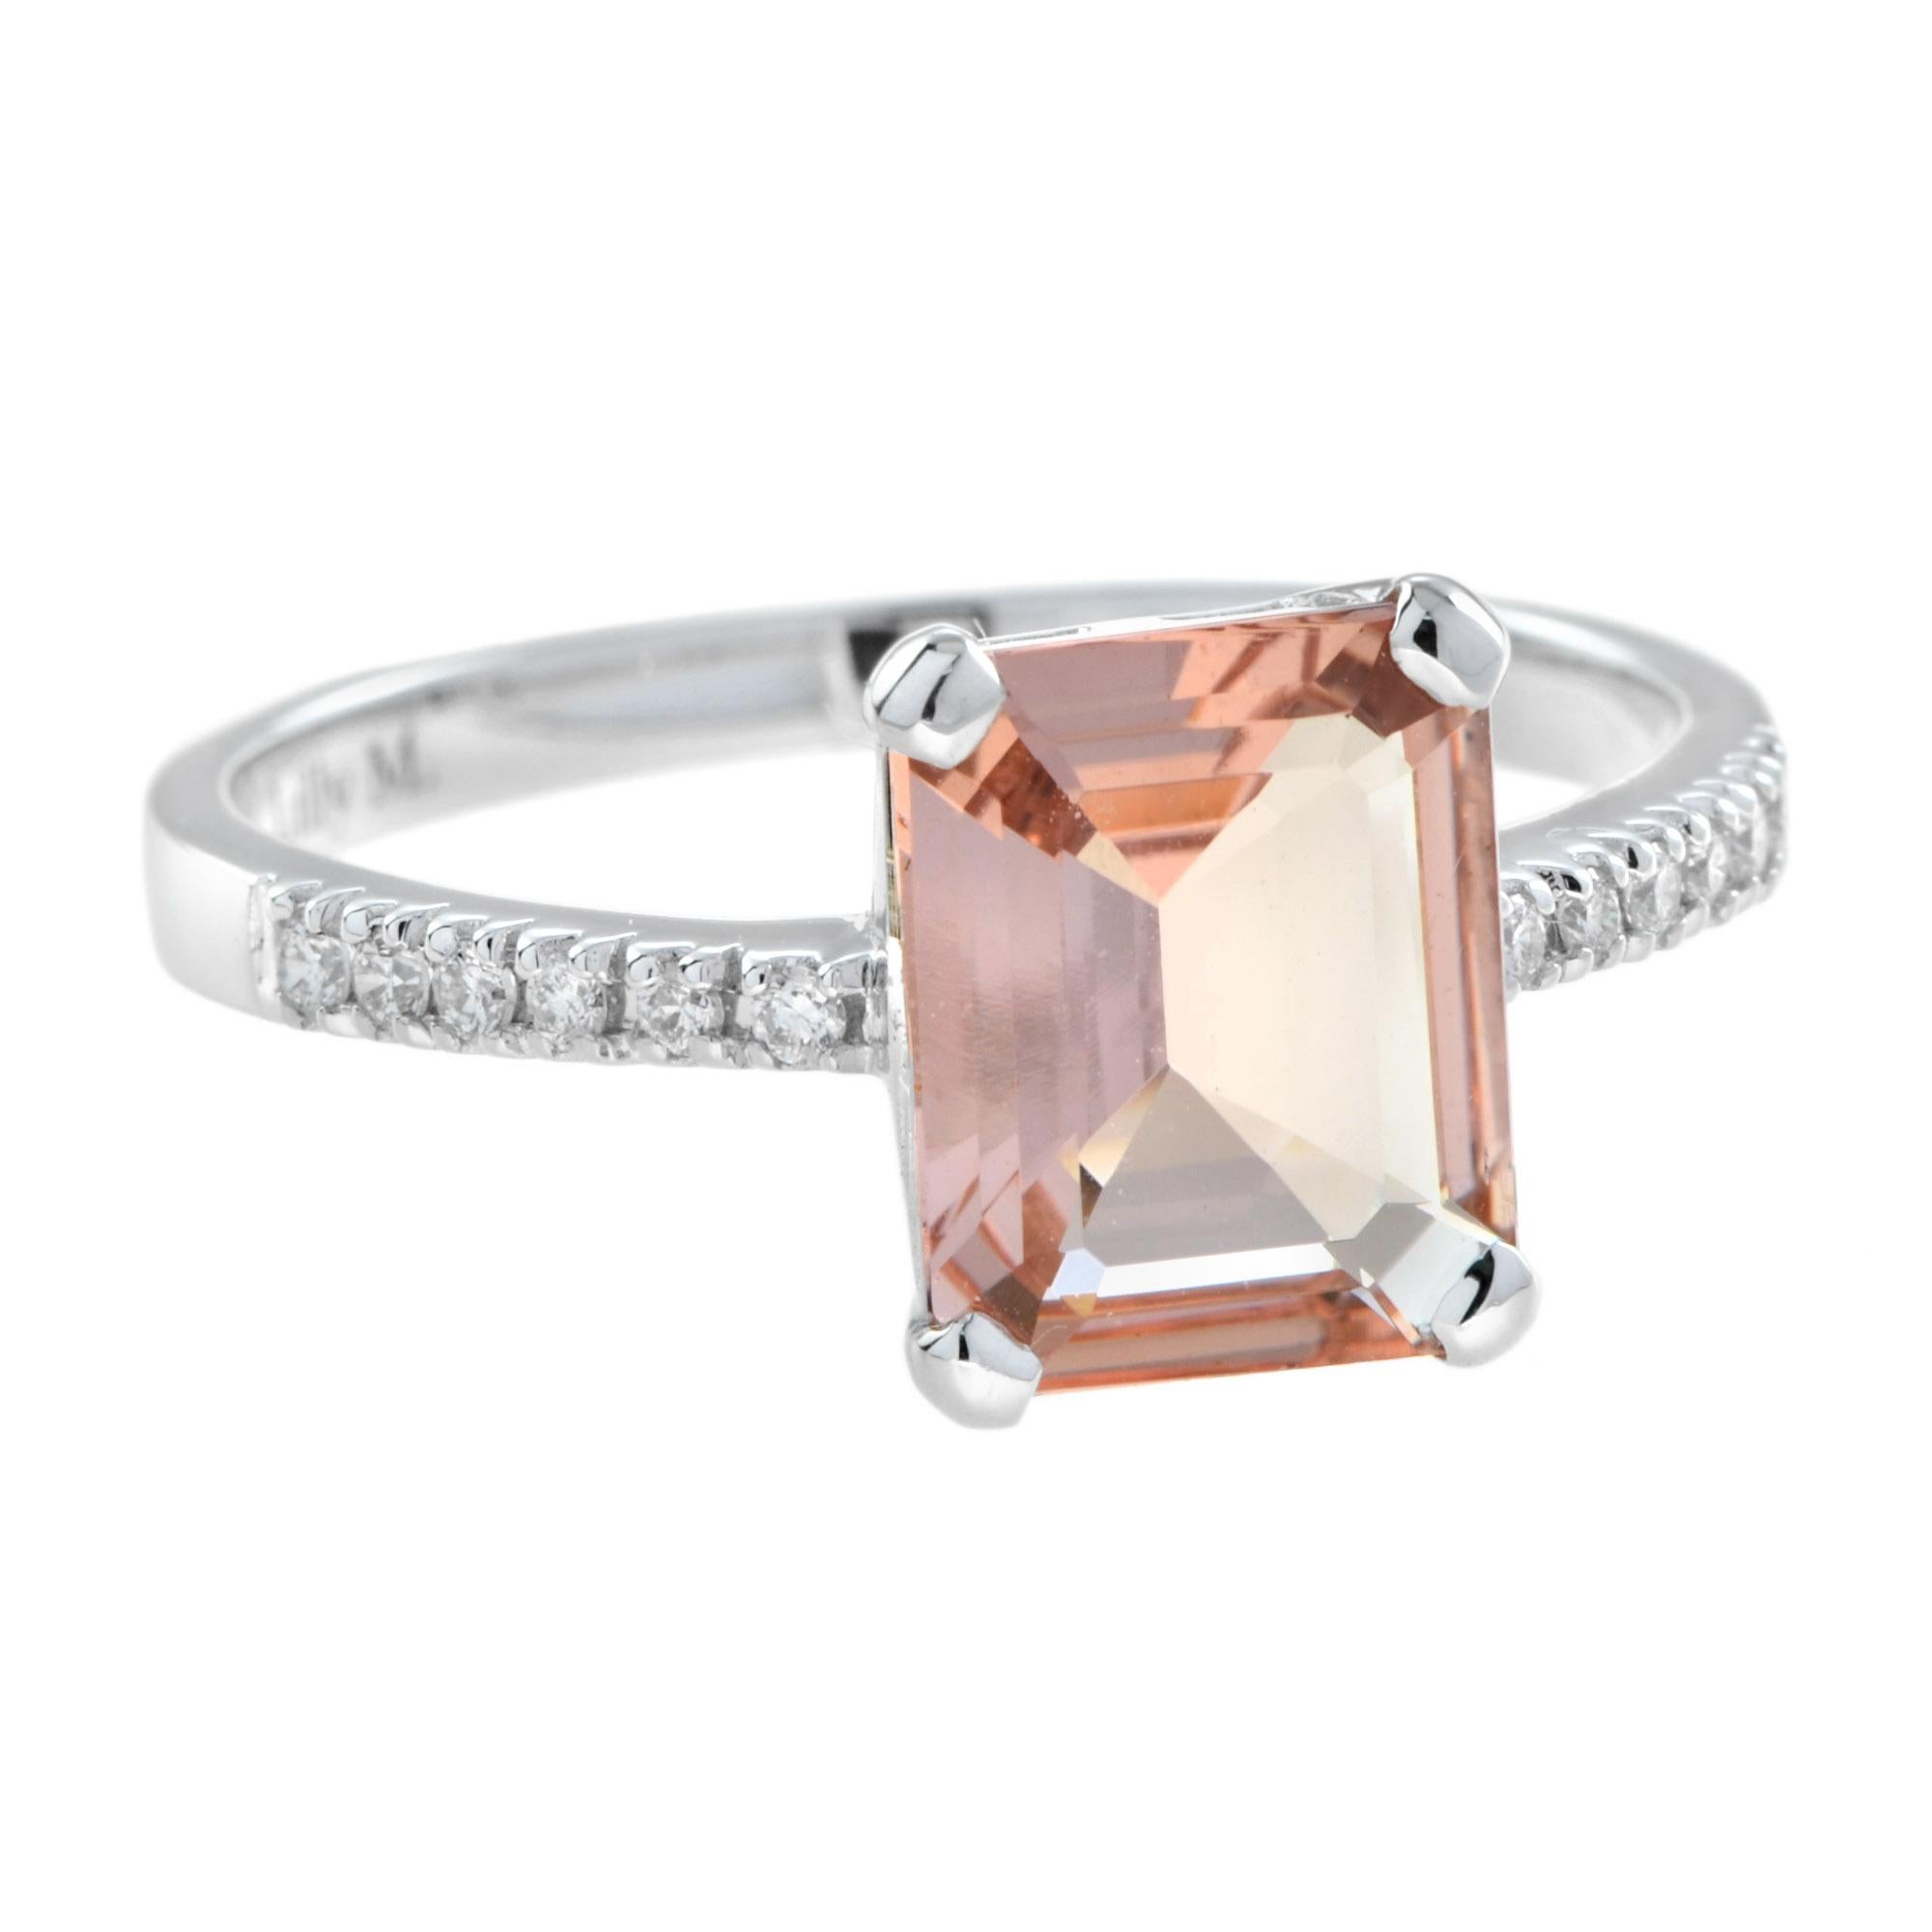 For Sale:  Emerald Cut Morganite with Diamond Engagement Ring in 18K White Gold 2